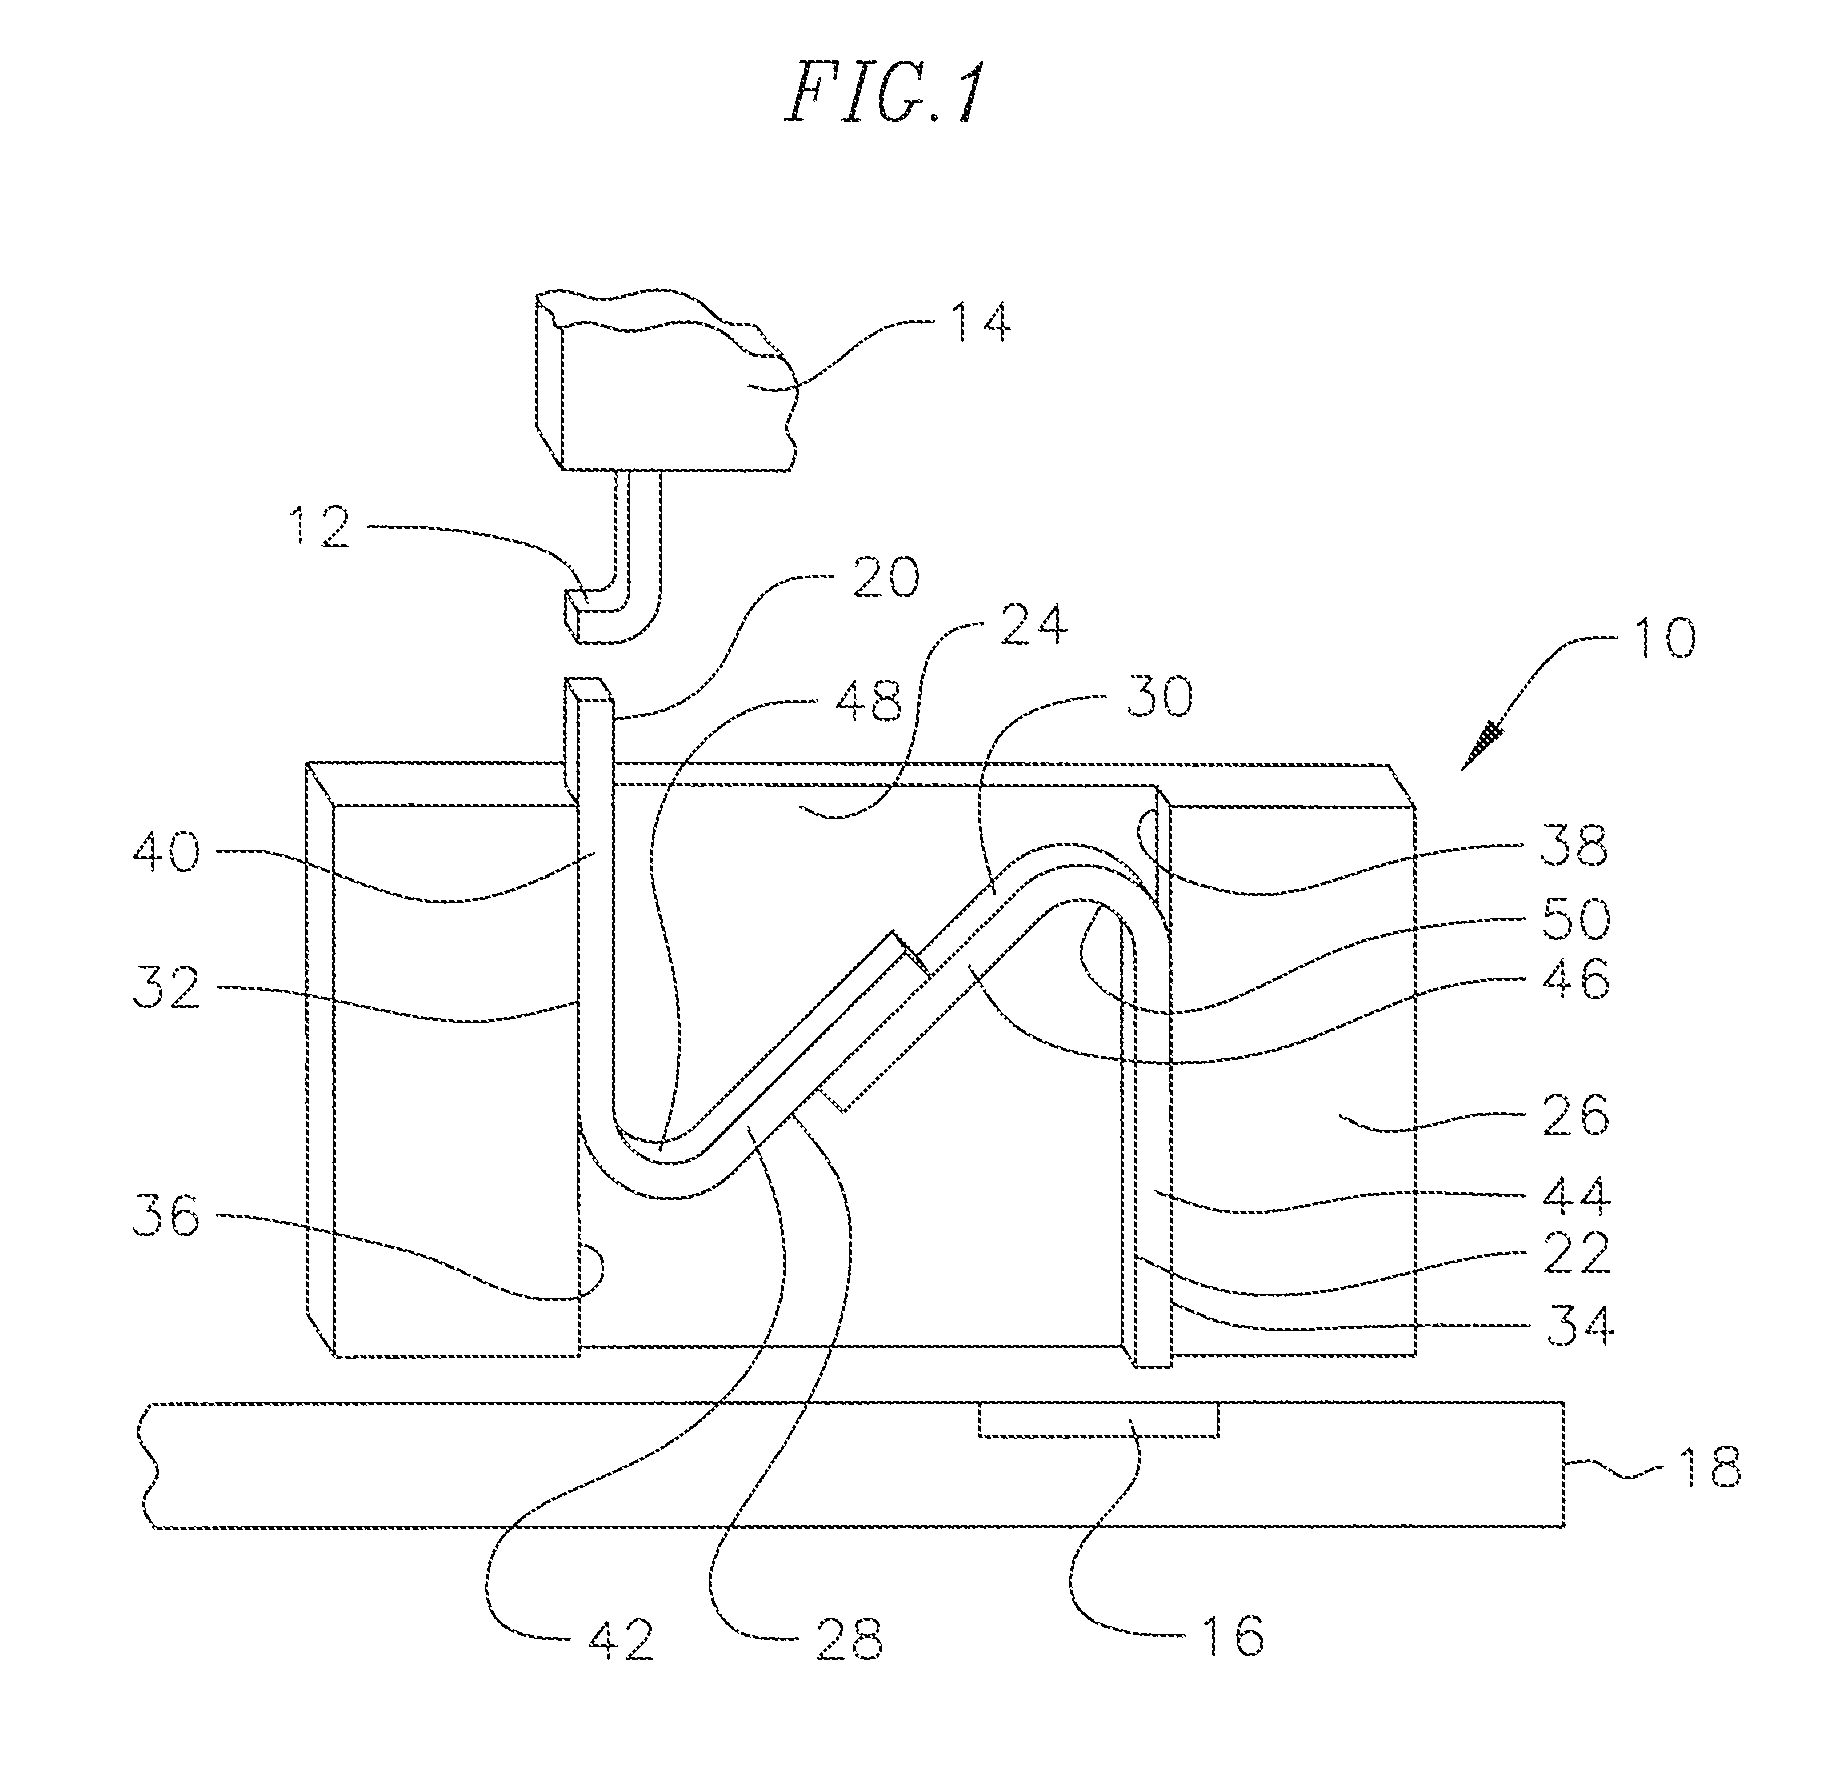 Semiconductor electromechanical contact